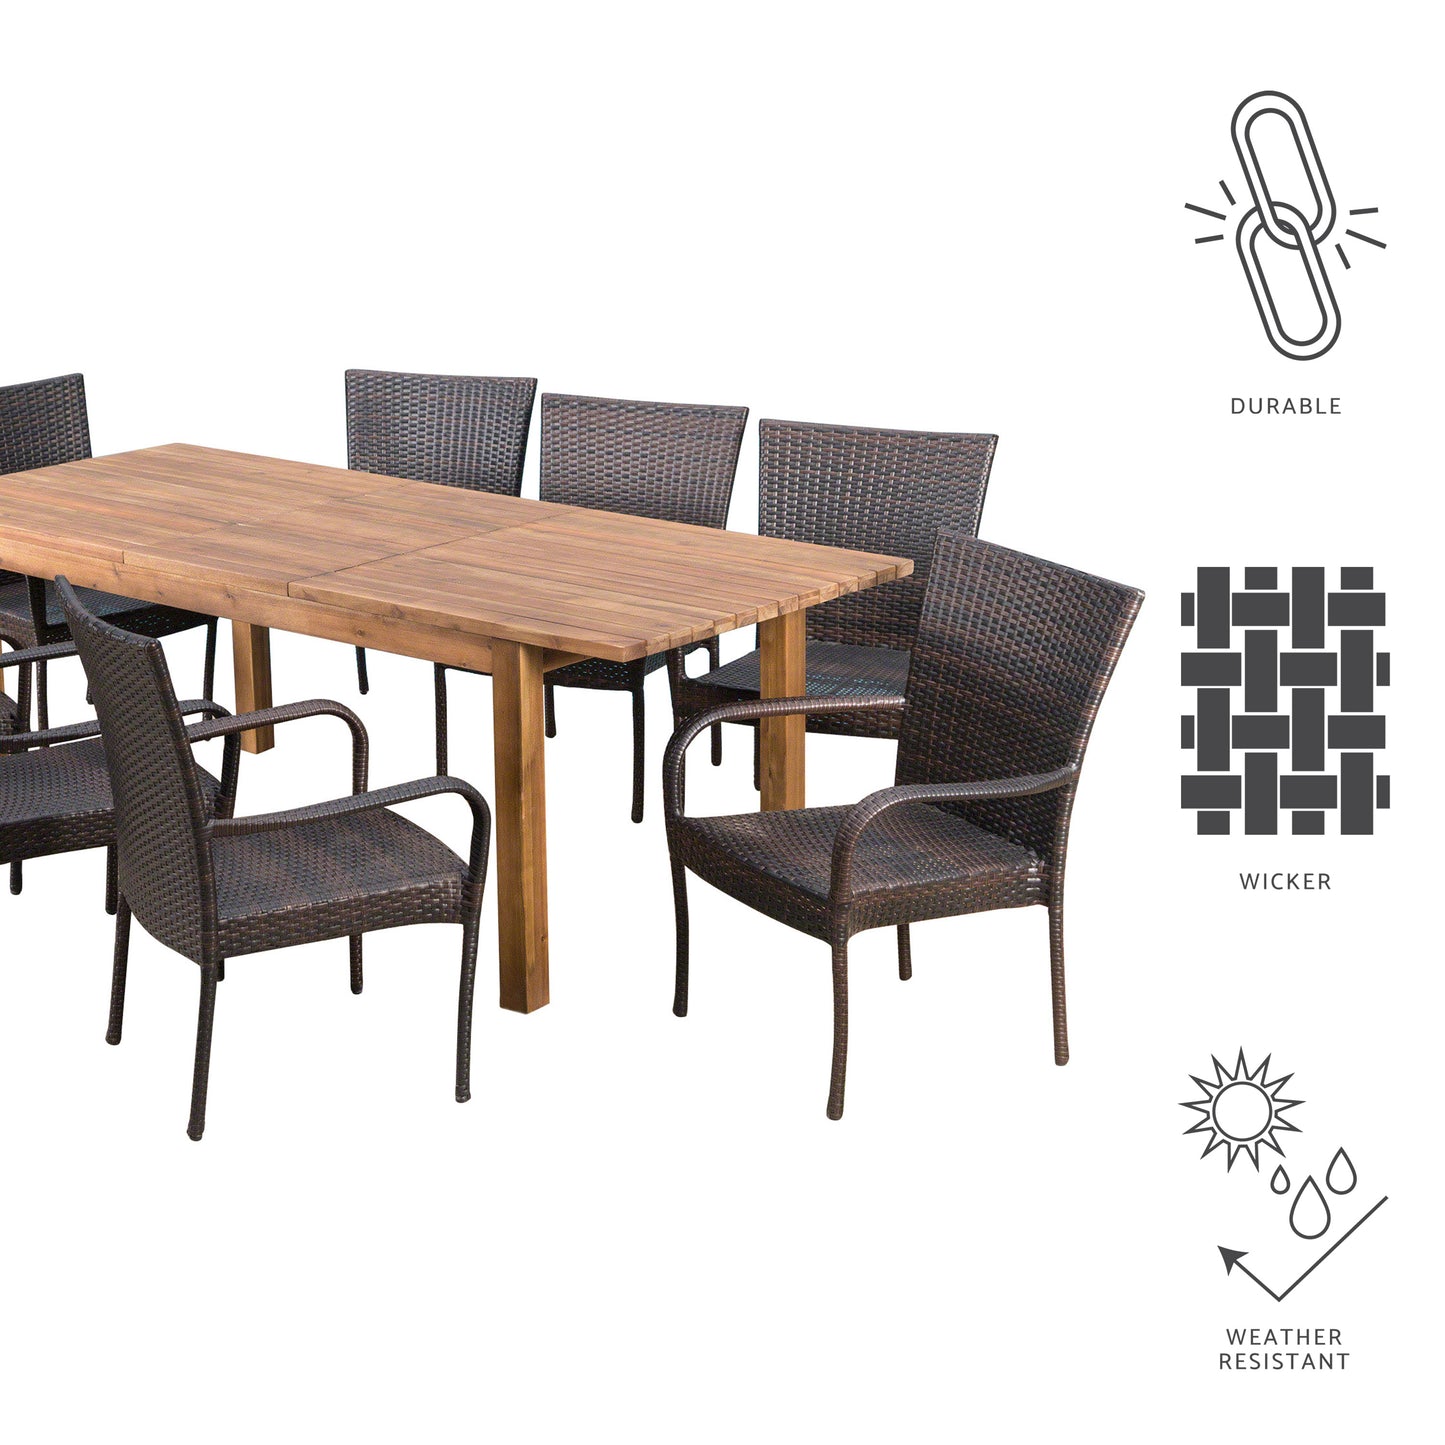 Delilah Outdoor 9 Piece Wicker Dining Set with Wood Expandable Dining Table